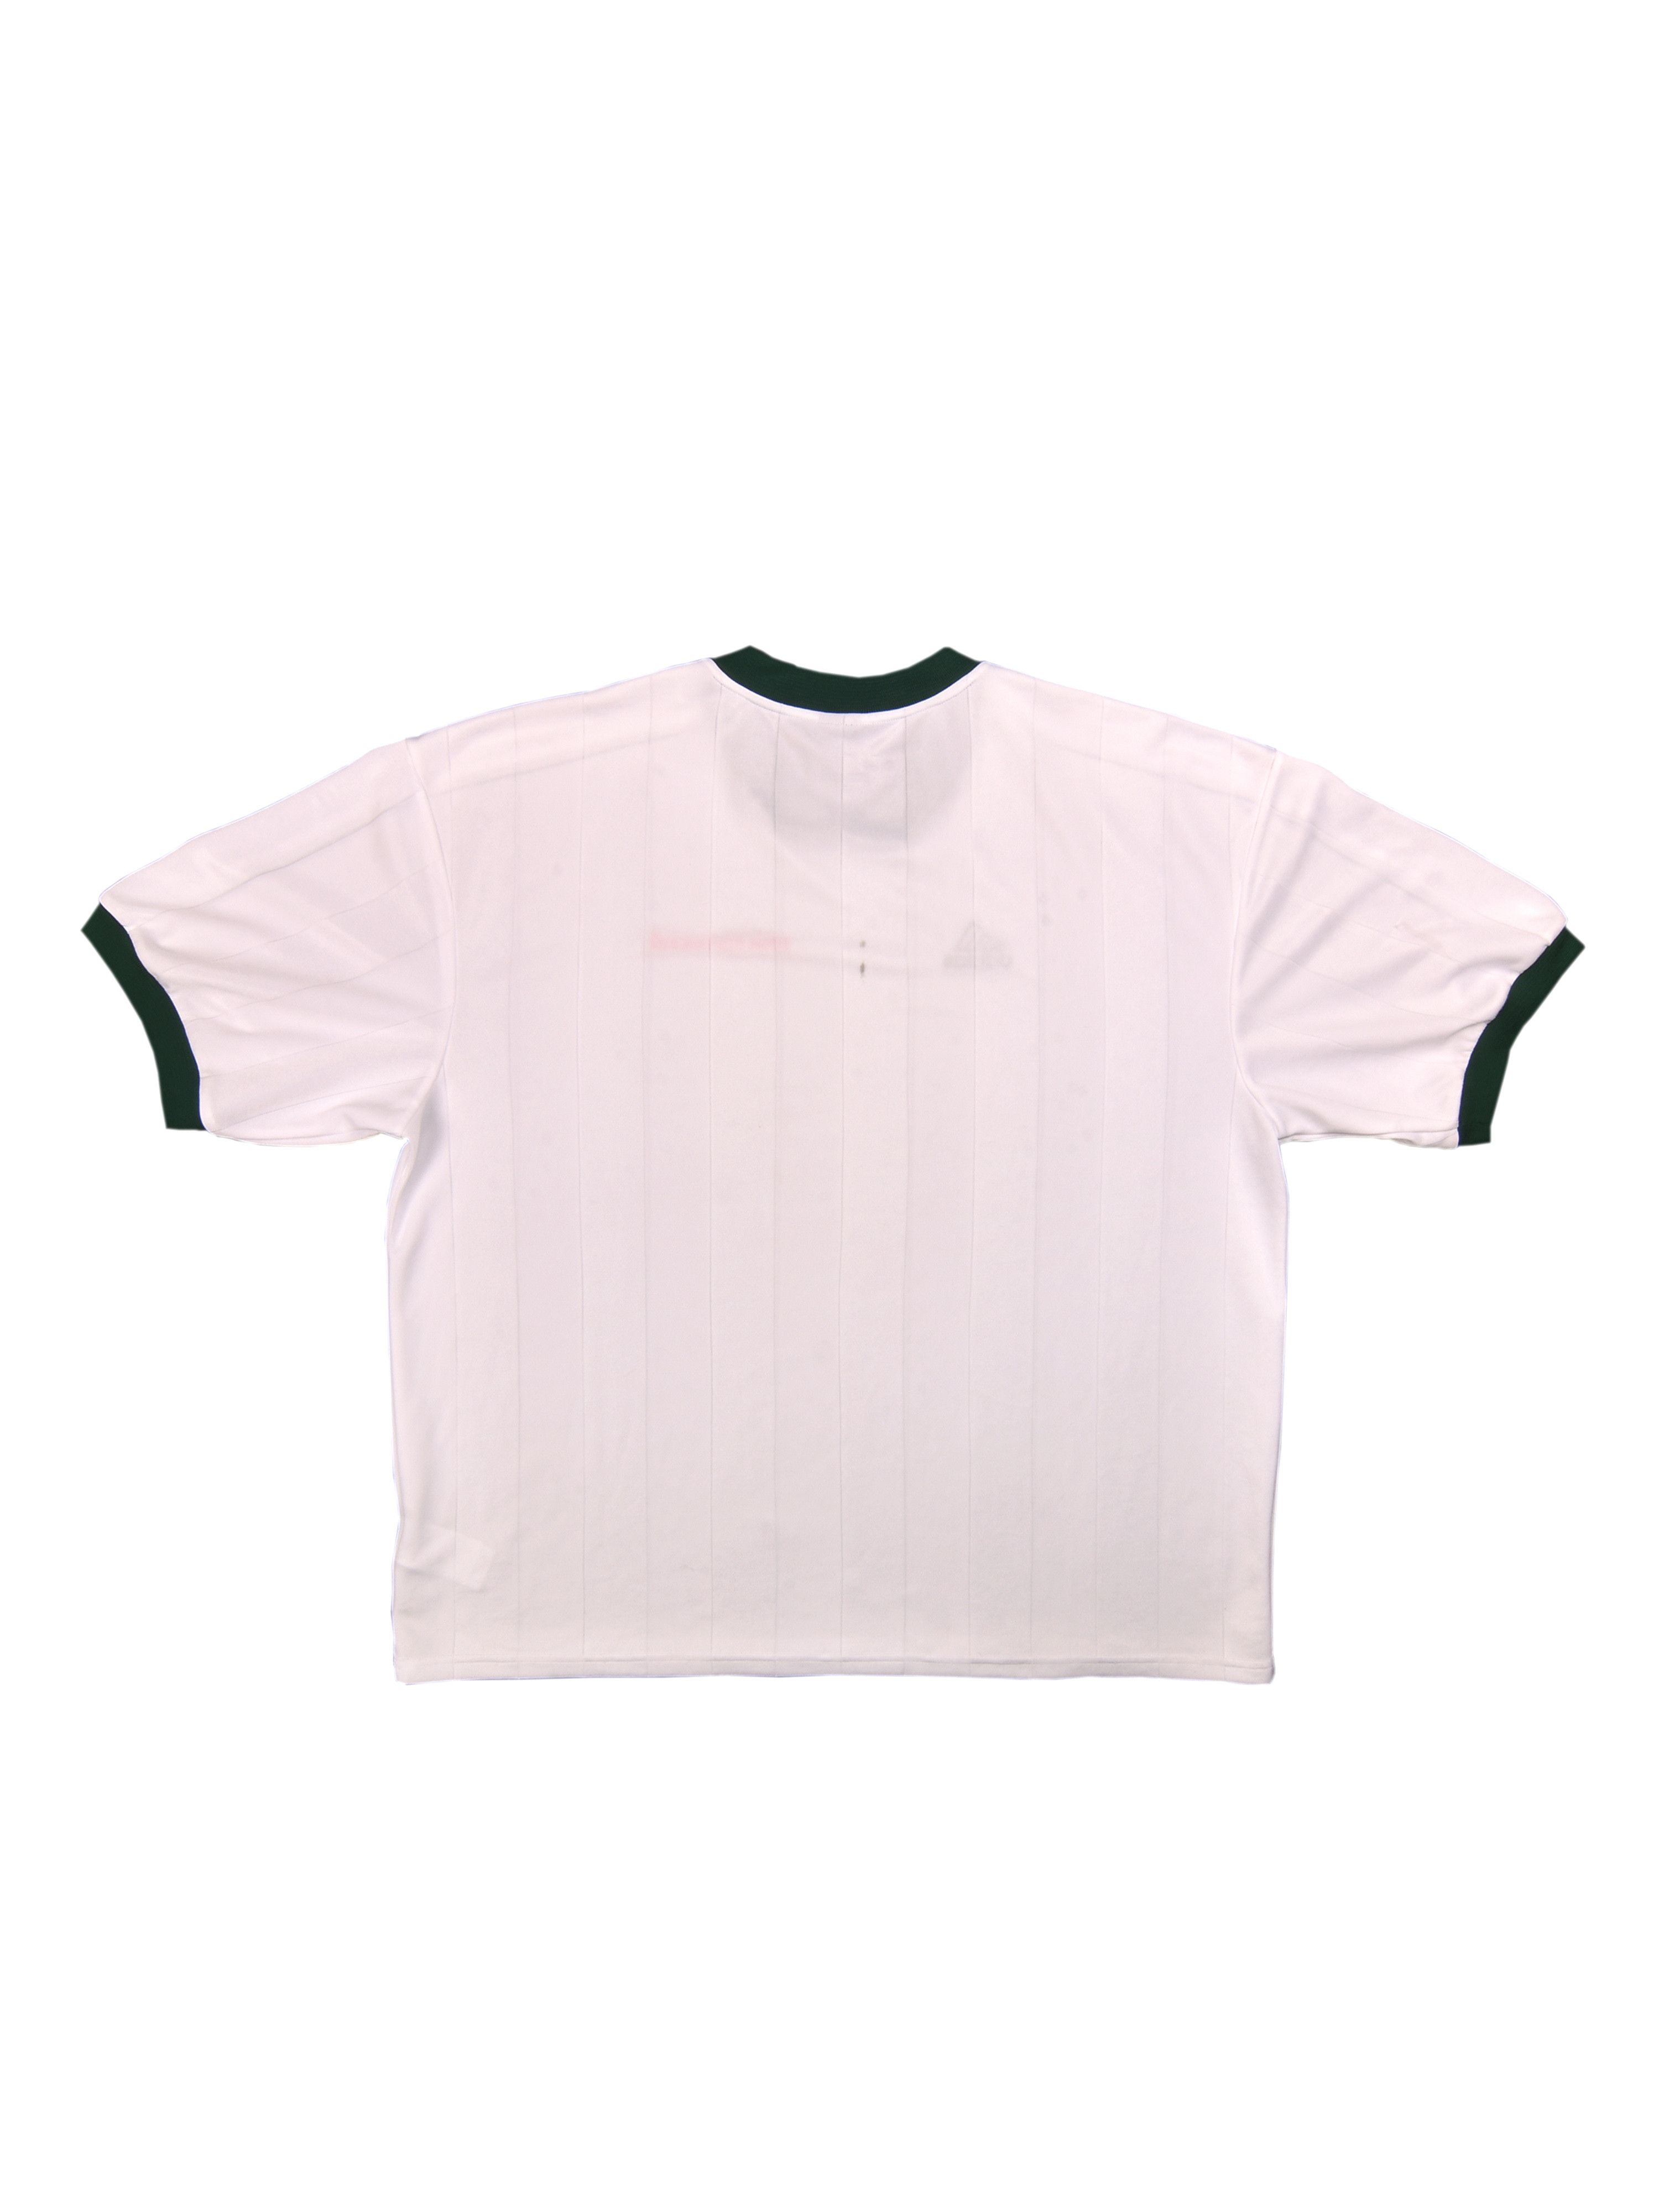 Adidas Soccer Jersey Size US M / EU 48-50 / 2 - 3 Preview